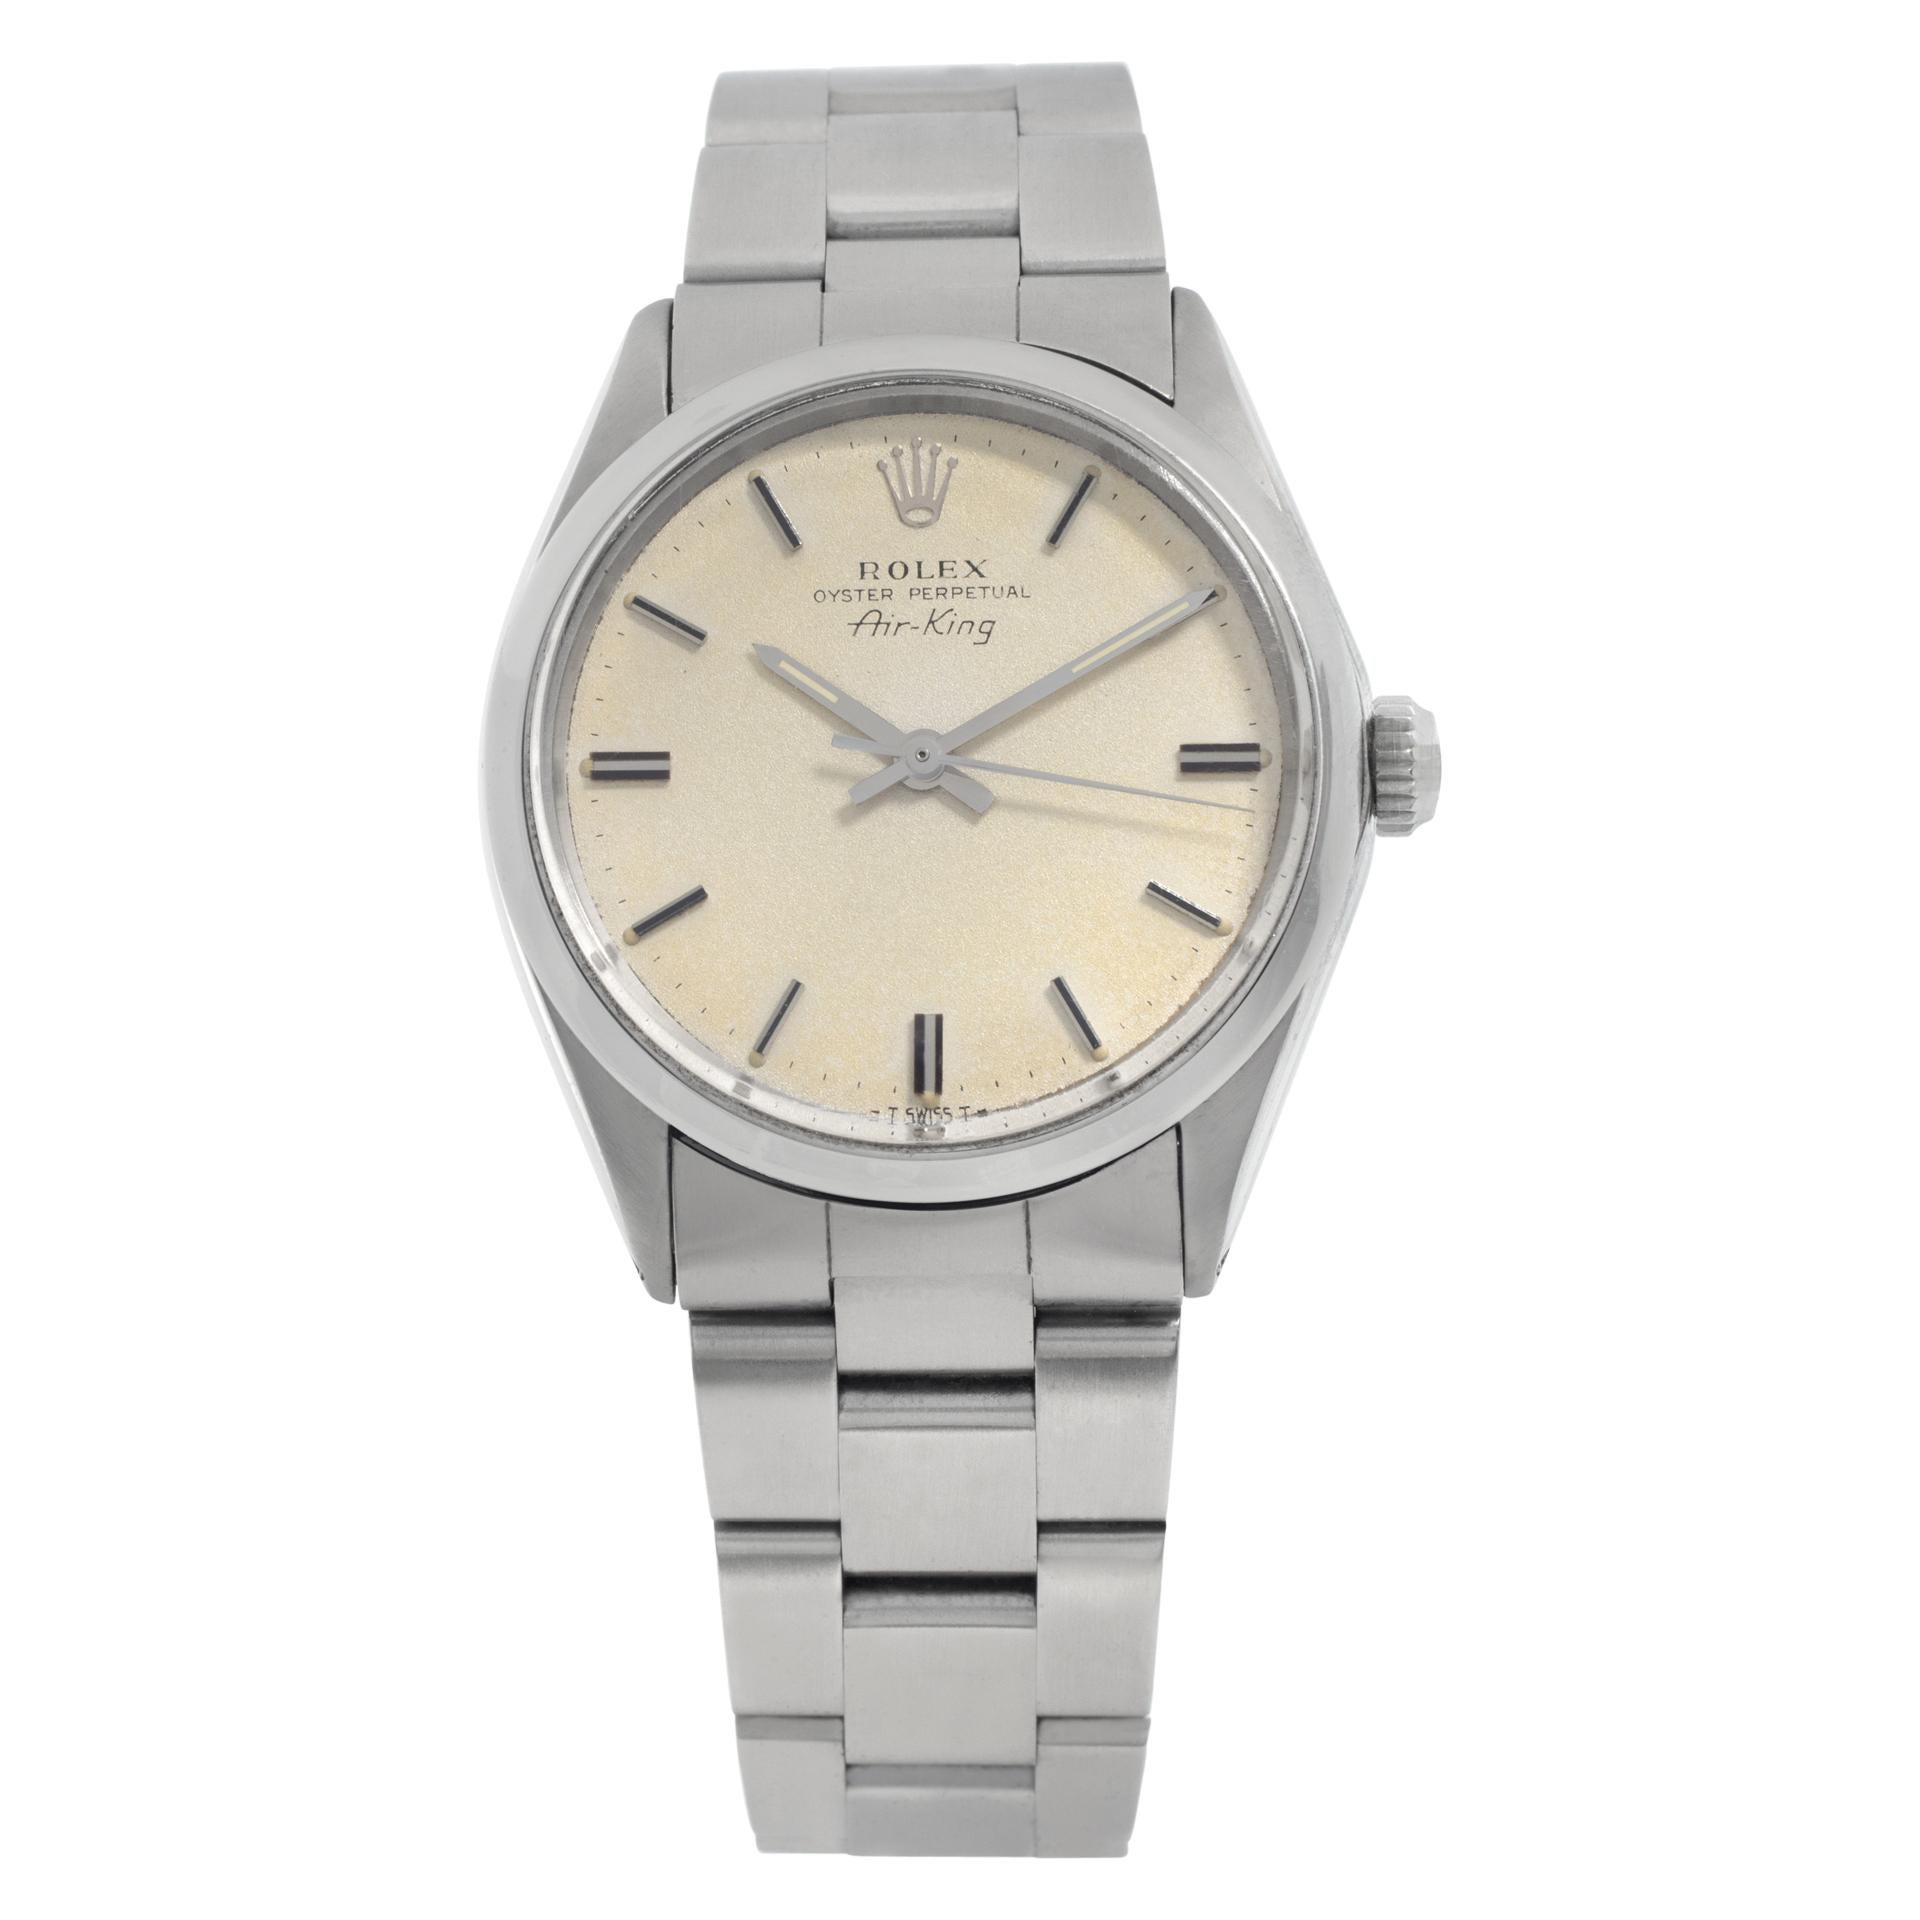 Rolex Air King 5500 in Stainless Steel Silver with a dial 33mm Automatic watch